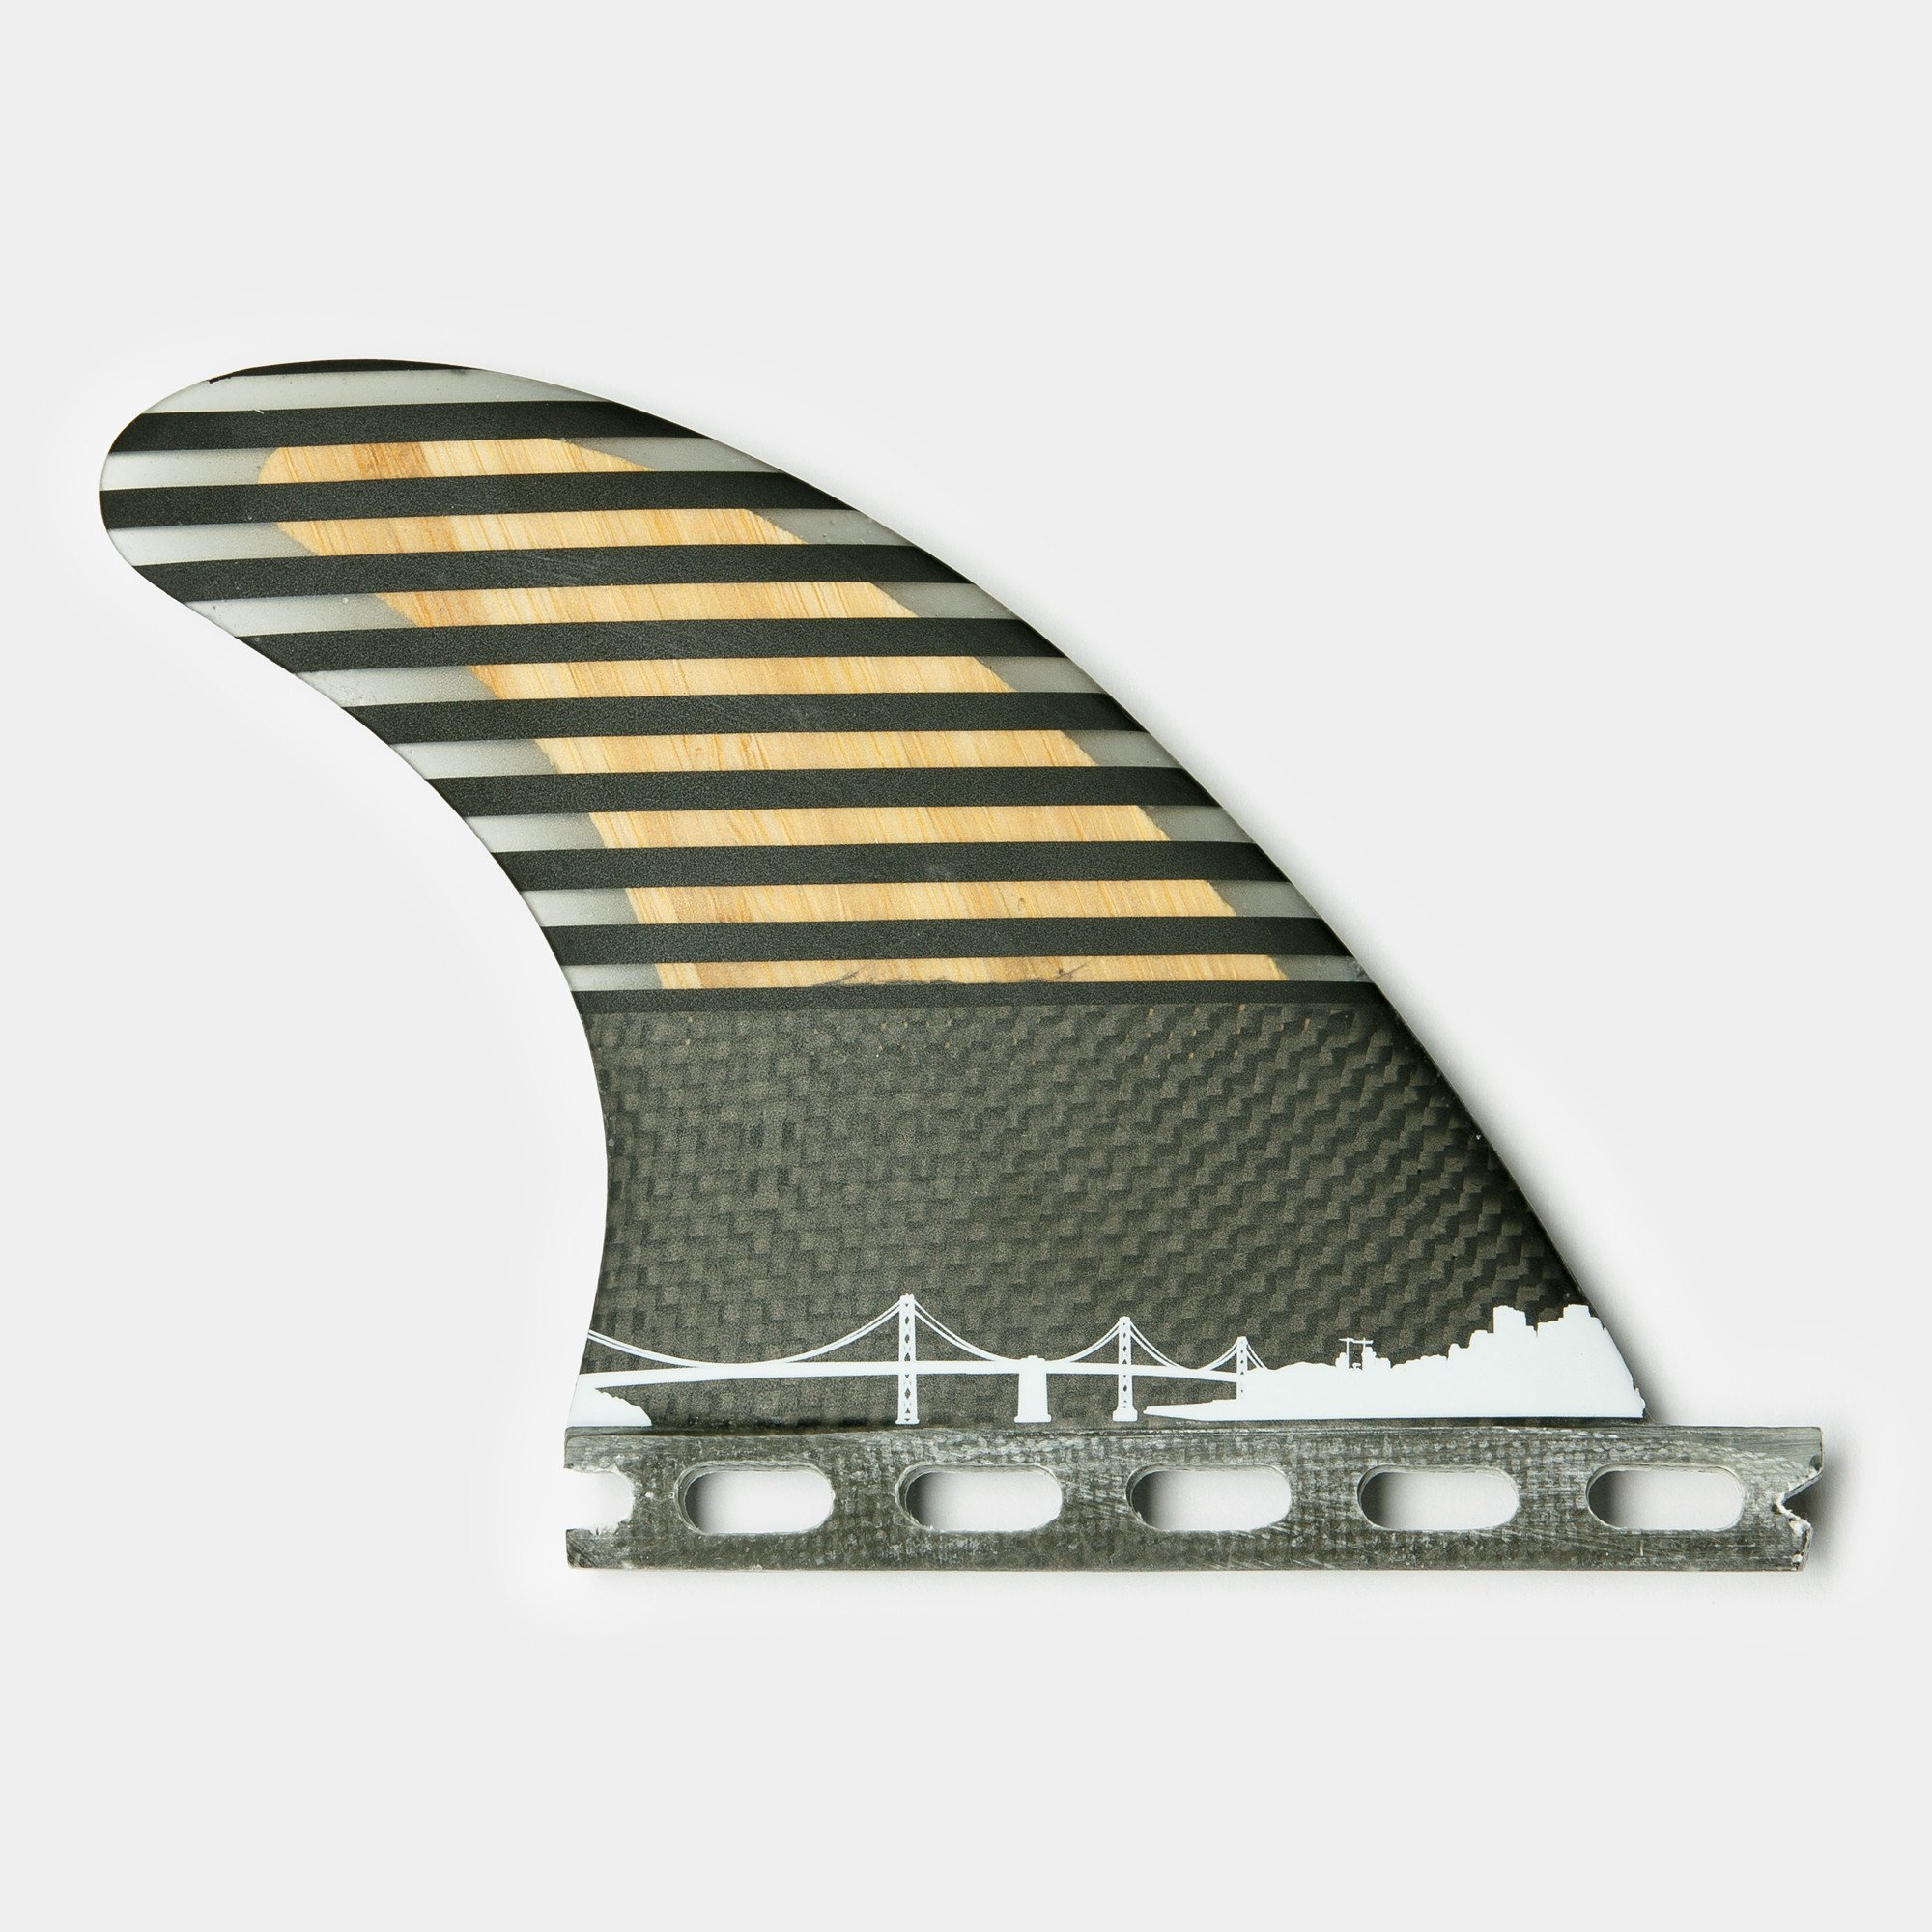 Awesome Futures Fins Bamboo Stripes - 5-Fin Set